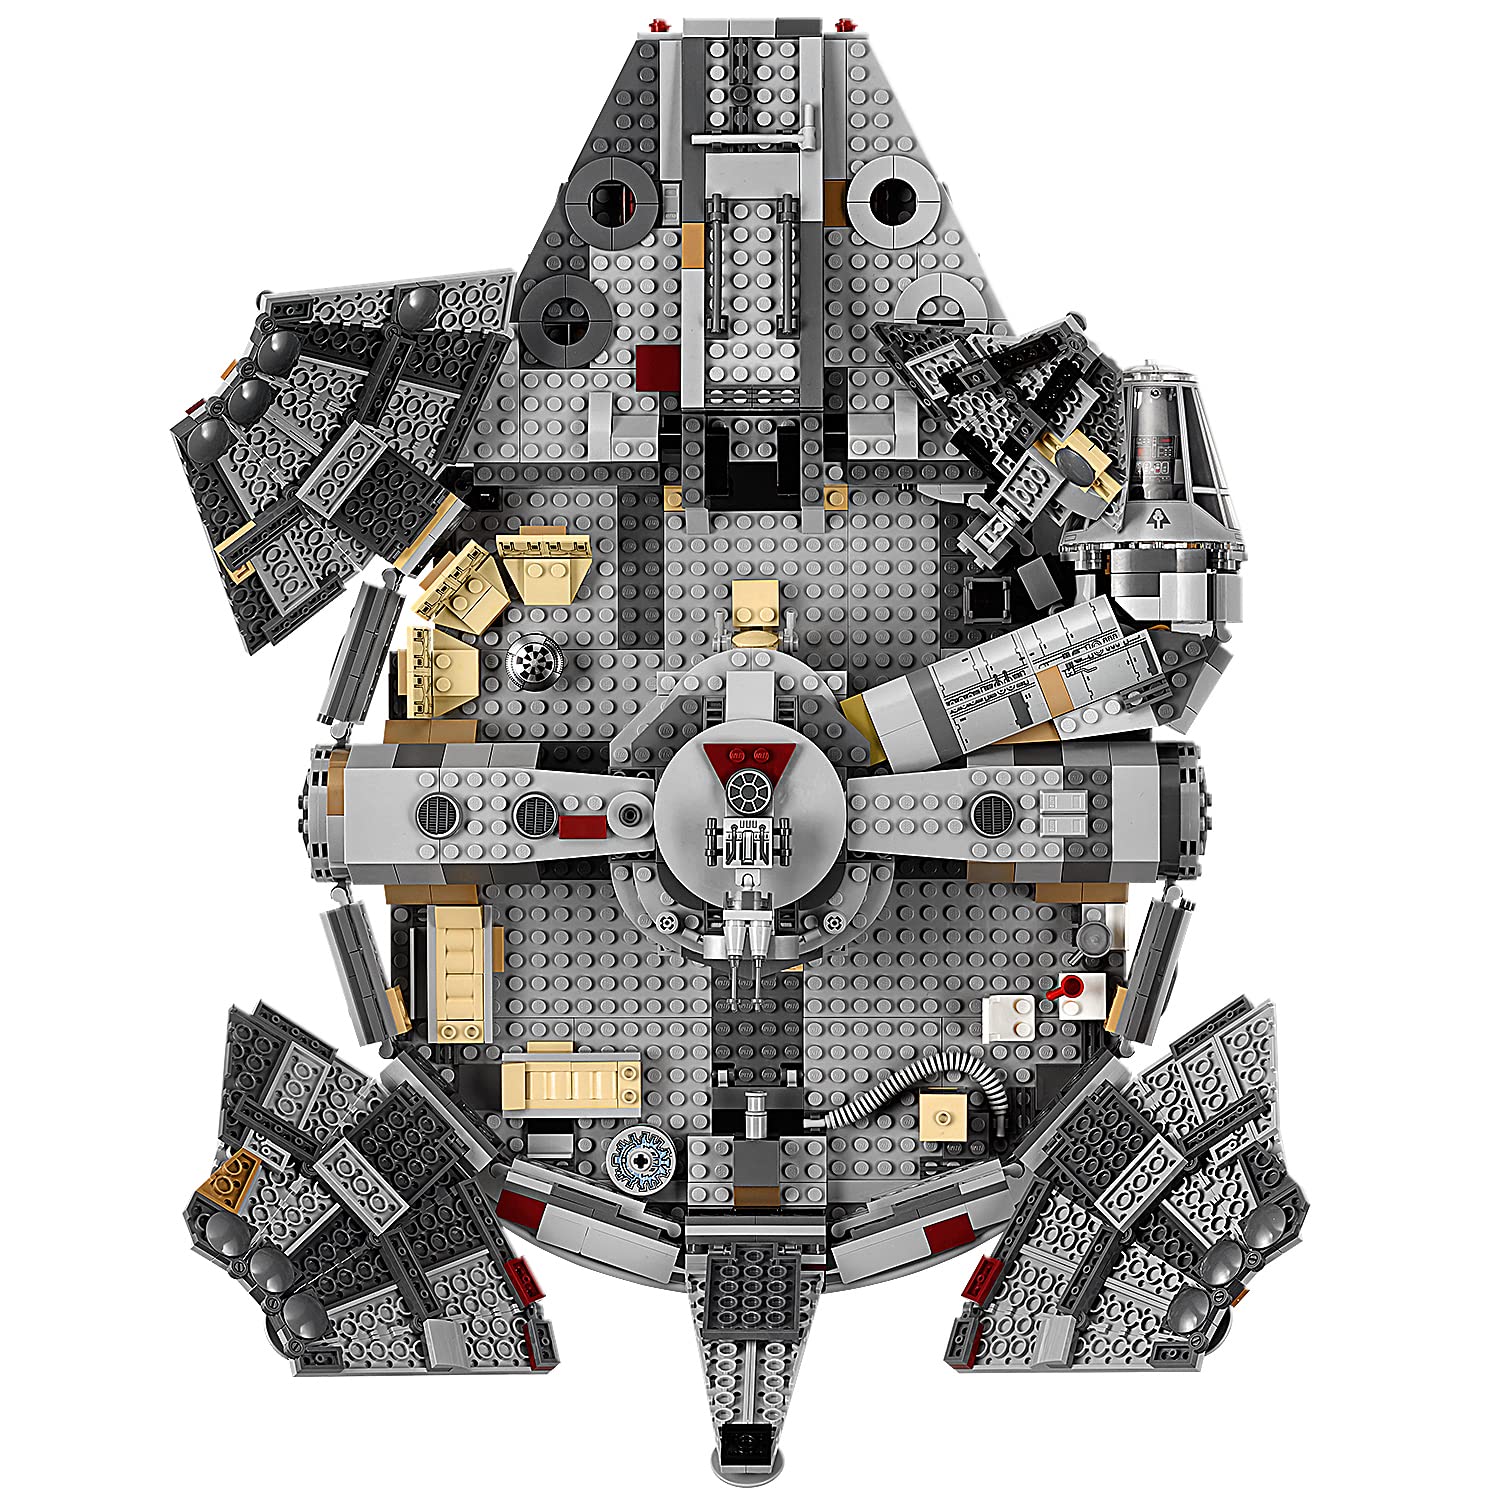 Lego 75257 Star Wars Millennium Falcon Starship Construction Set, with Finn, Chewbacca, Lando Calrissian, Boolio, C-3PO, R2-D2 and D-O, The Rise of Skywalker Collection,9 years and up